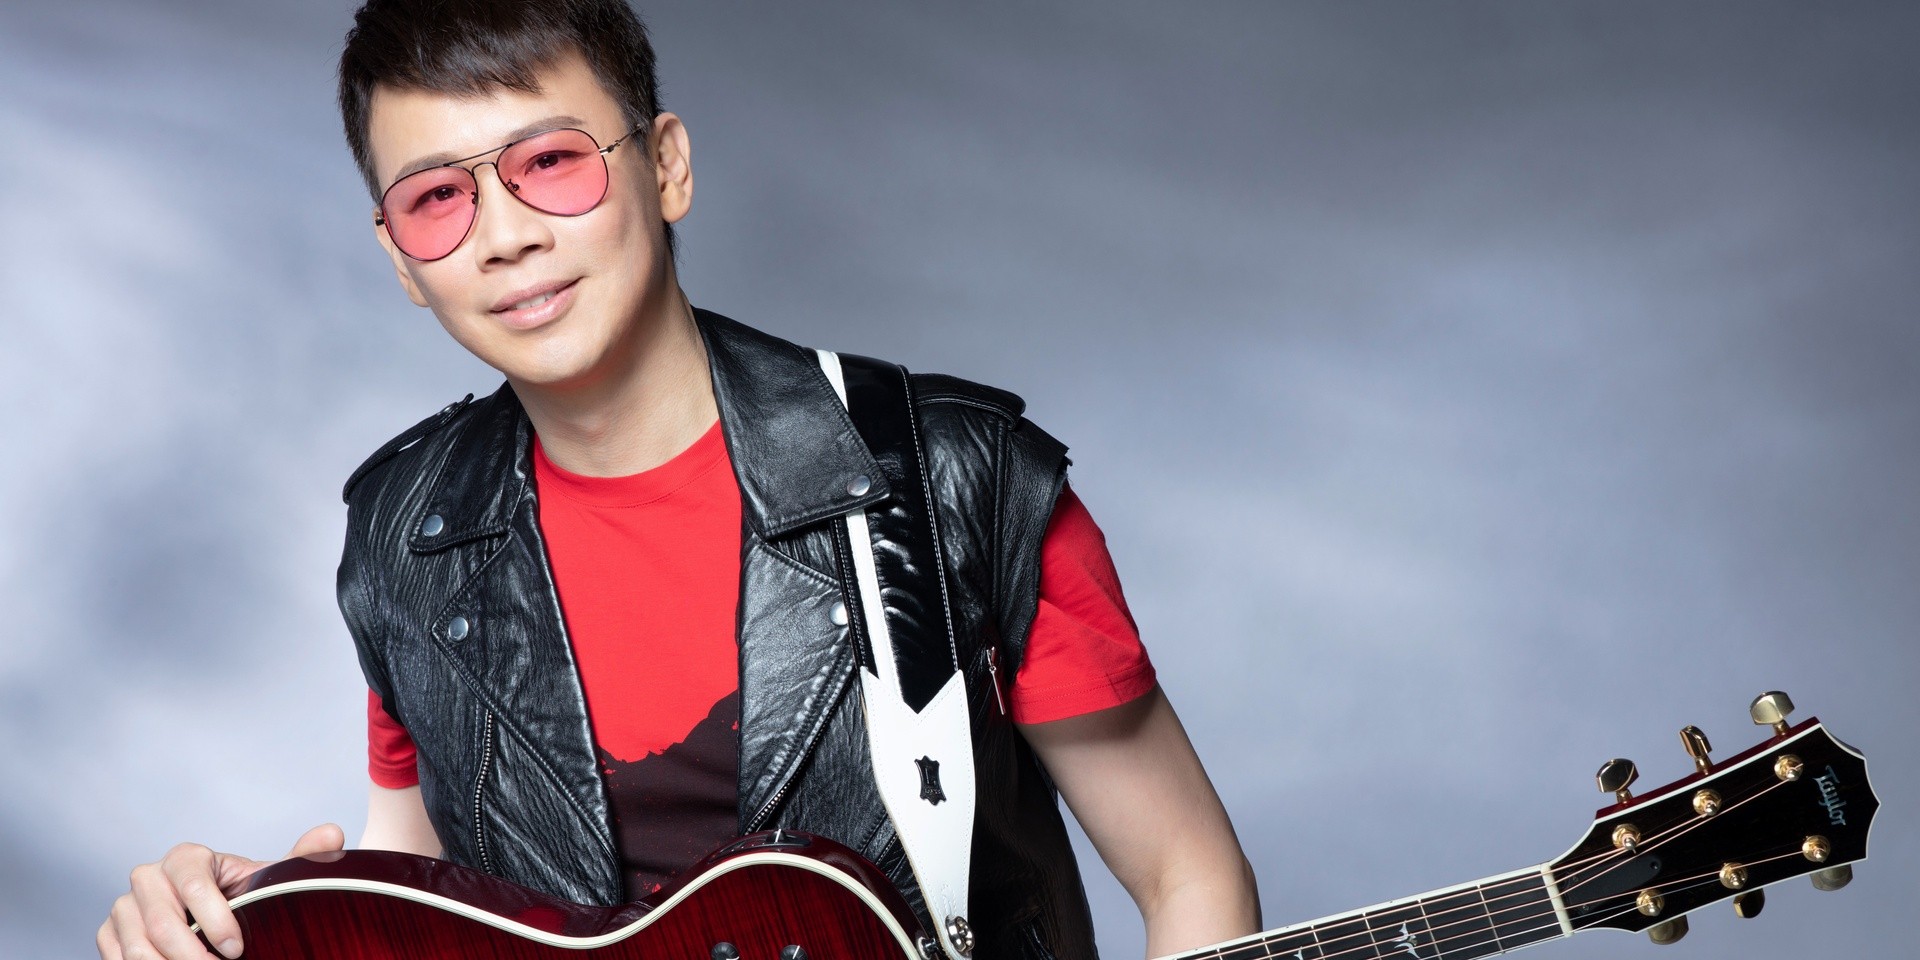 David Tao will be coming to Singapore for Huayi 2020